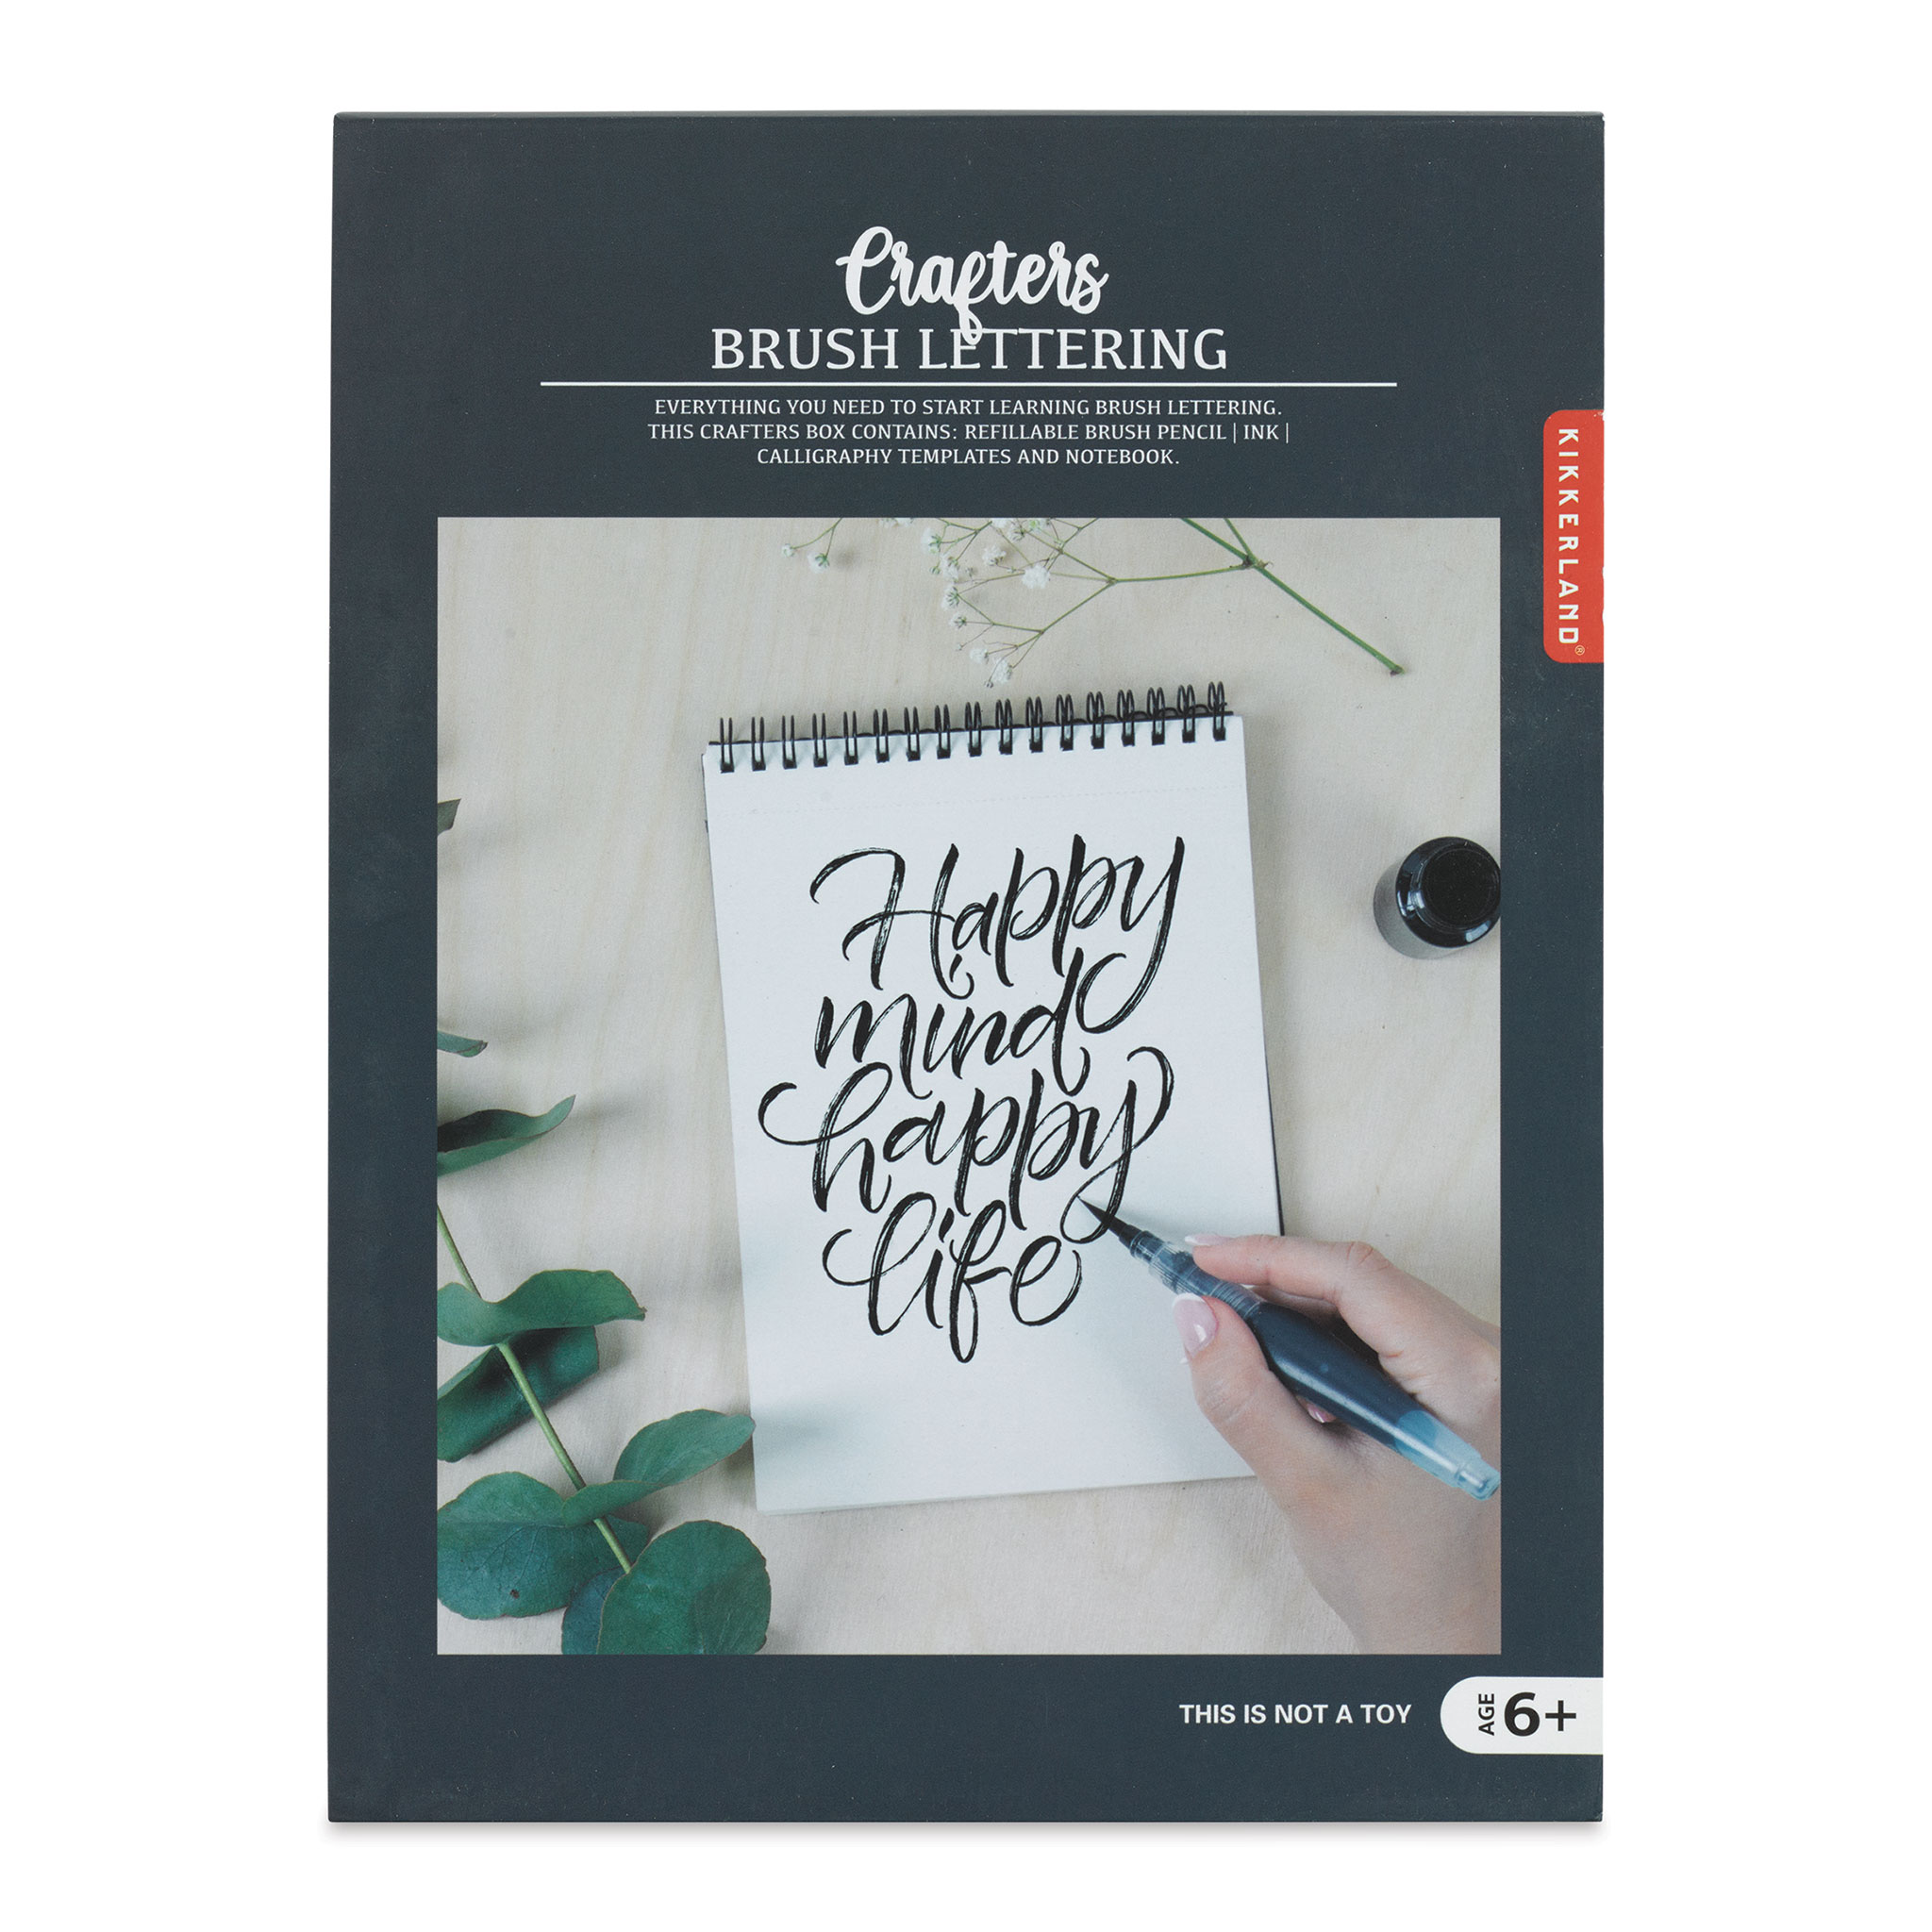 SpiceBox Creative Lettering for Young Artists Kit 